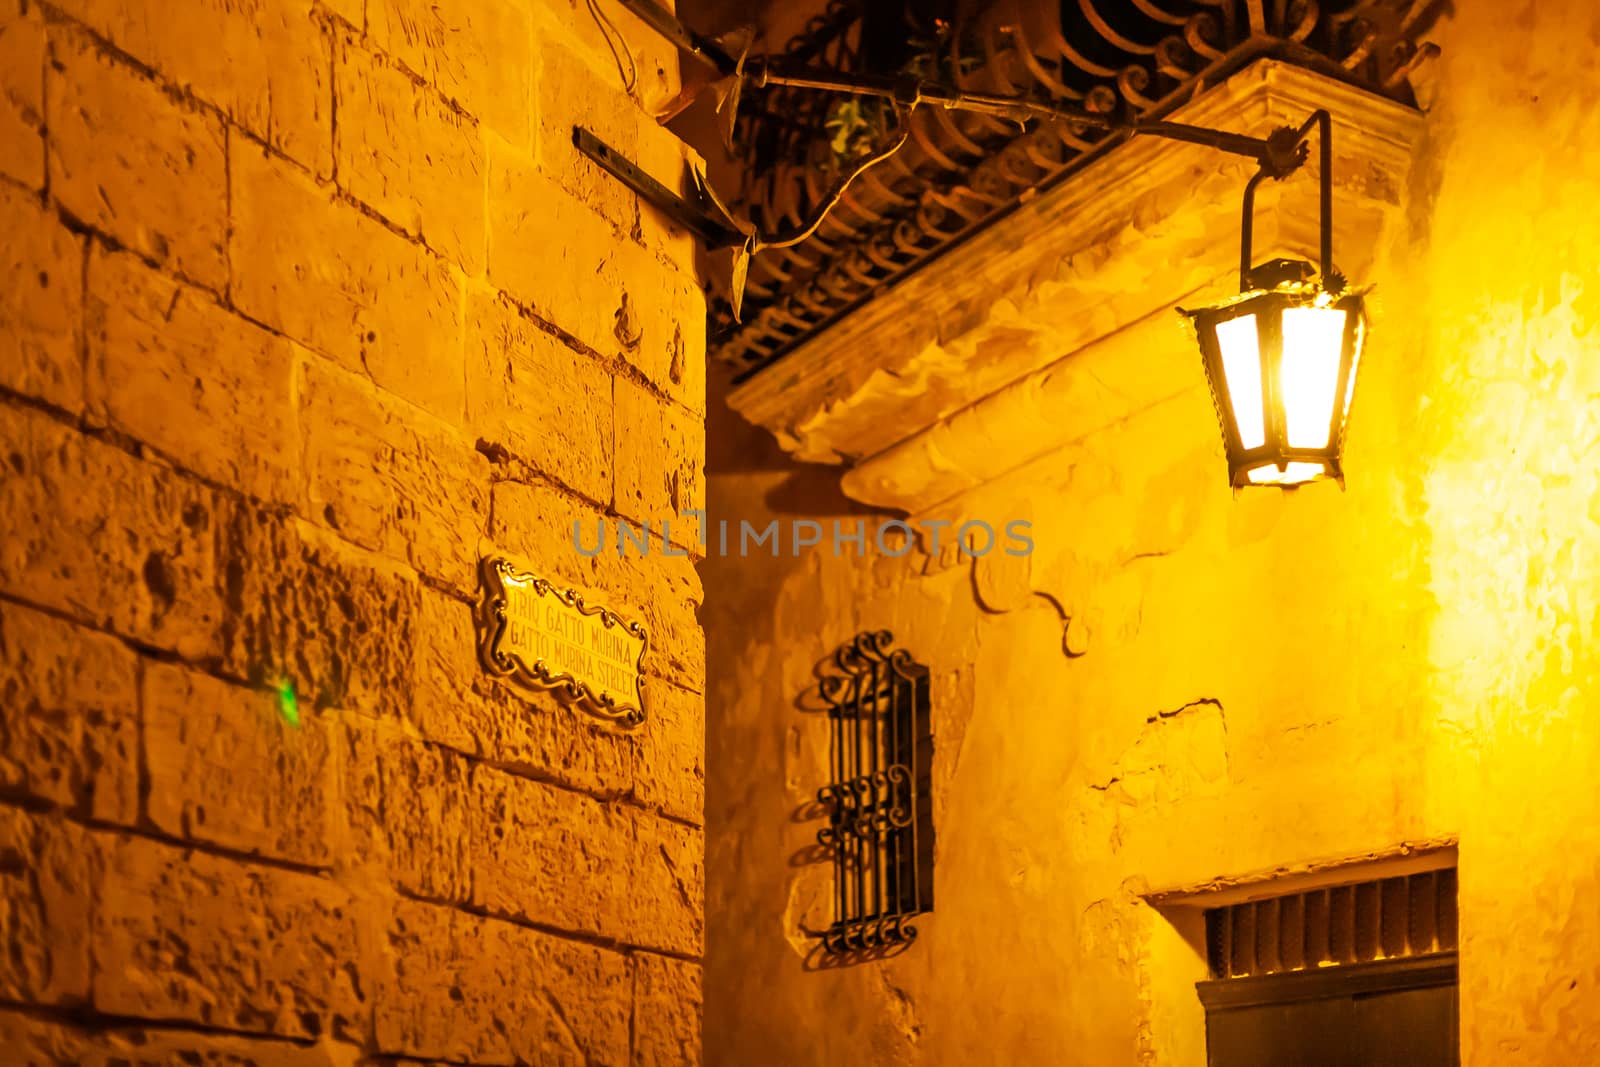 Narrow streets of Mdina, ancient capital of Malta. Night view on illuminated buildings and wall decorations of ancient town. by aksenovko